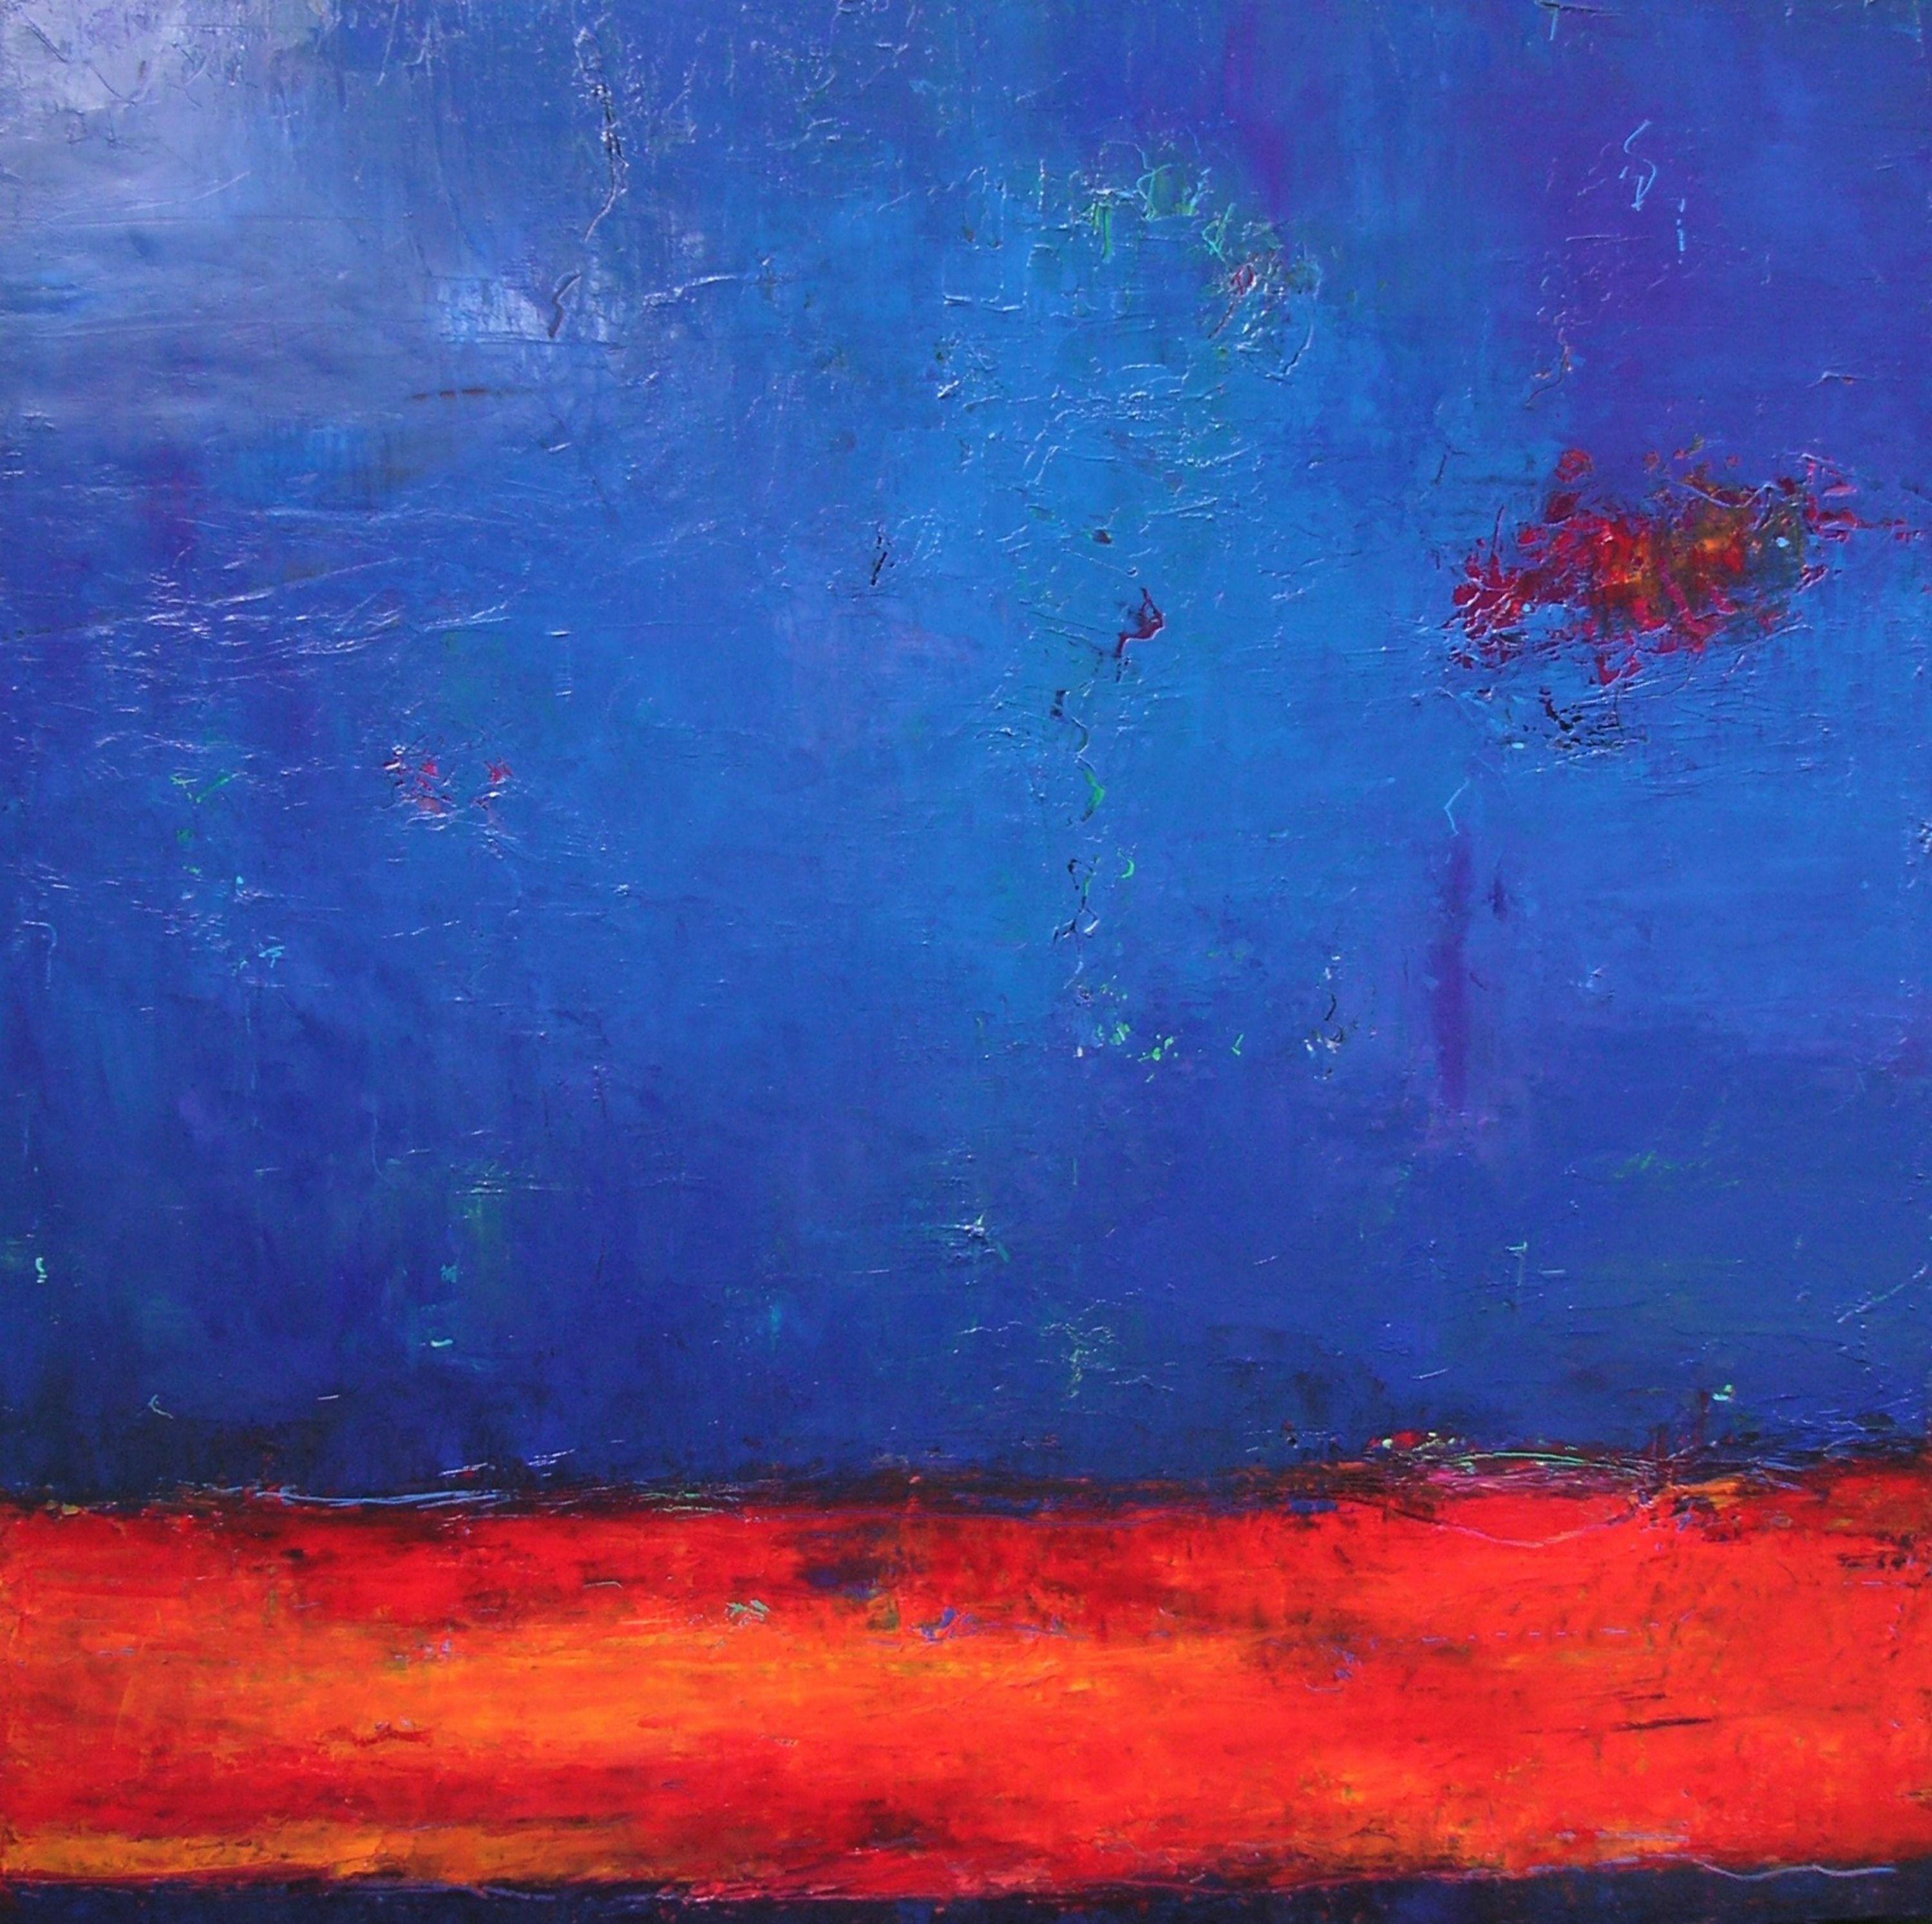 Angela Dierks Abstract Painting - Quiet Sky, Warm Night, Painting, Oil on Canvas